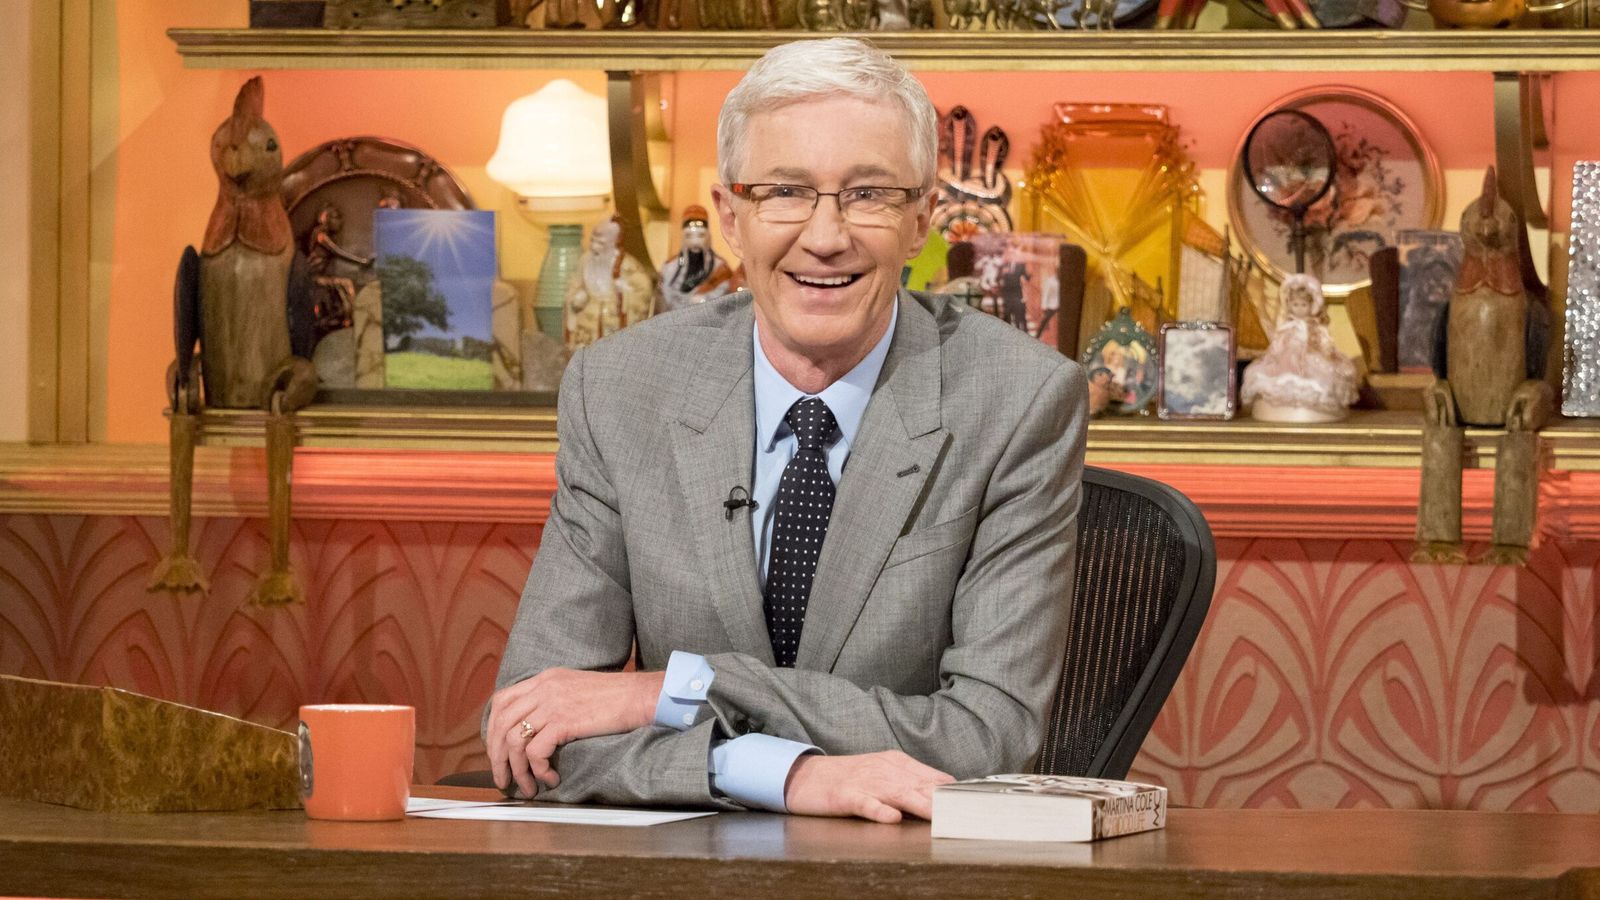 Details of Paul O'Grady's funeral procession through Kent village revealed